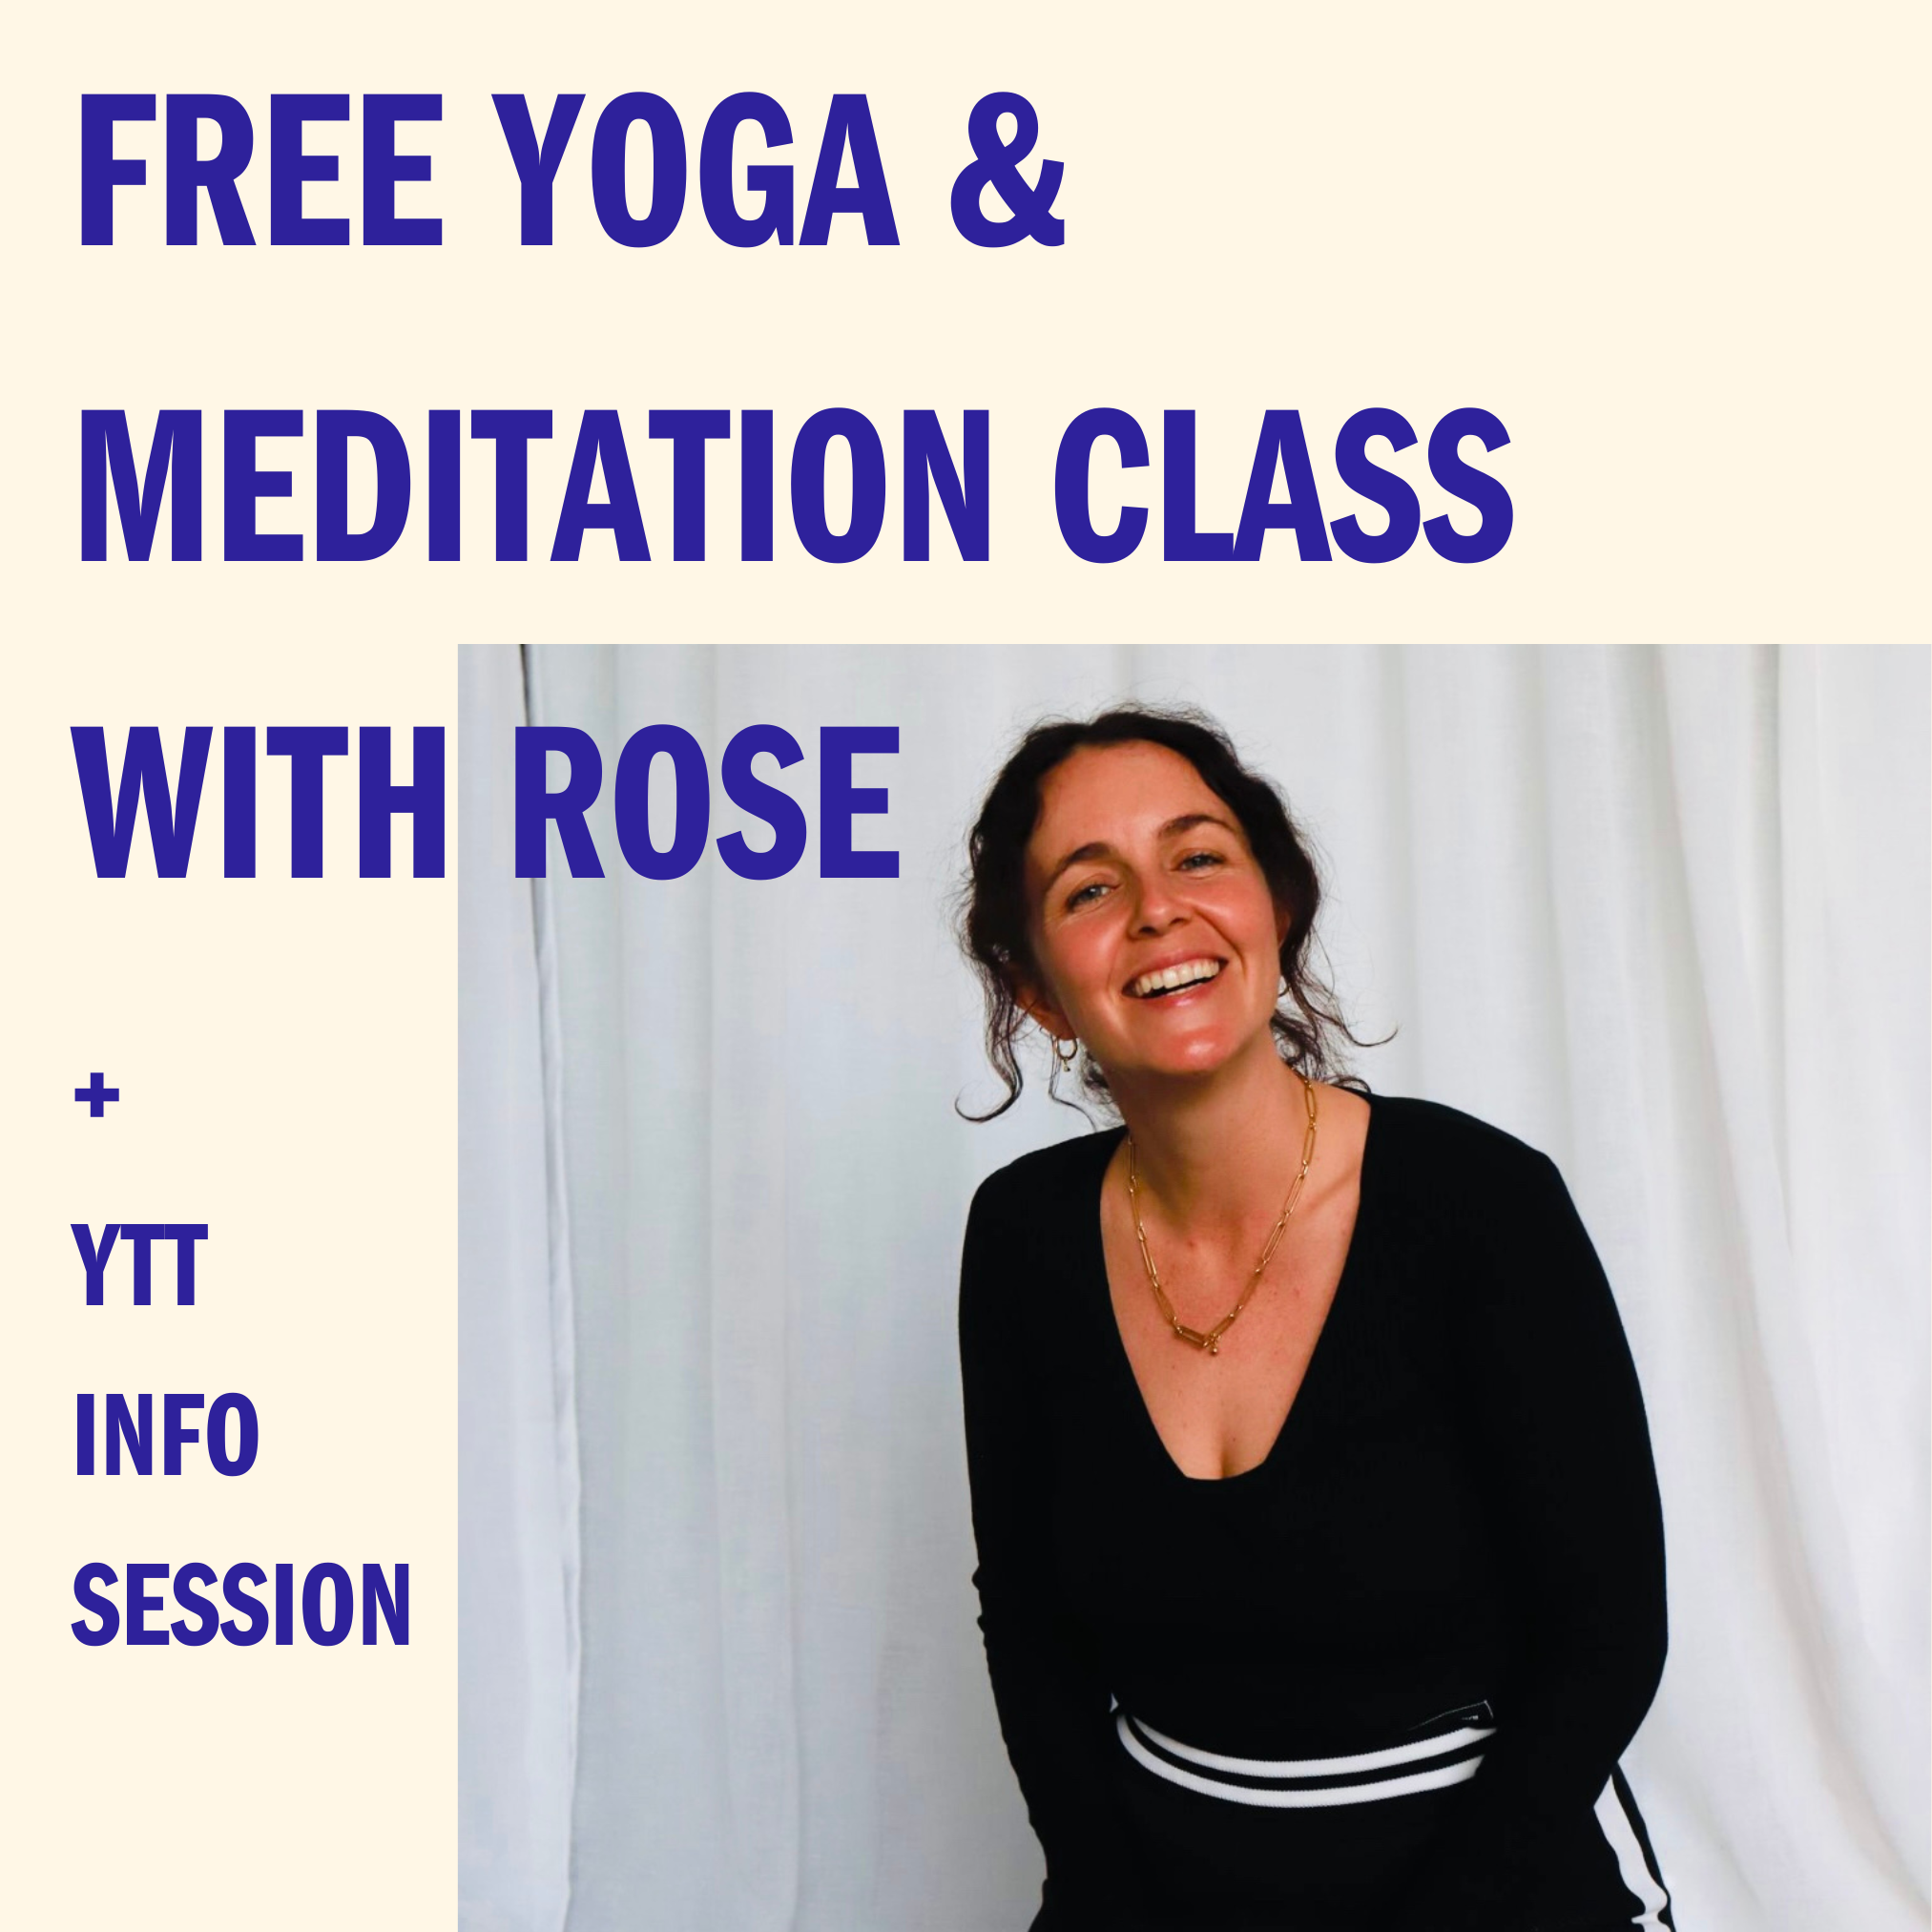 Free Yoga & Meditation Class +  In-person YTT info session